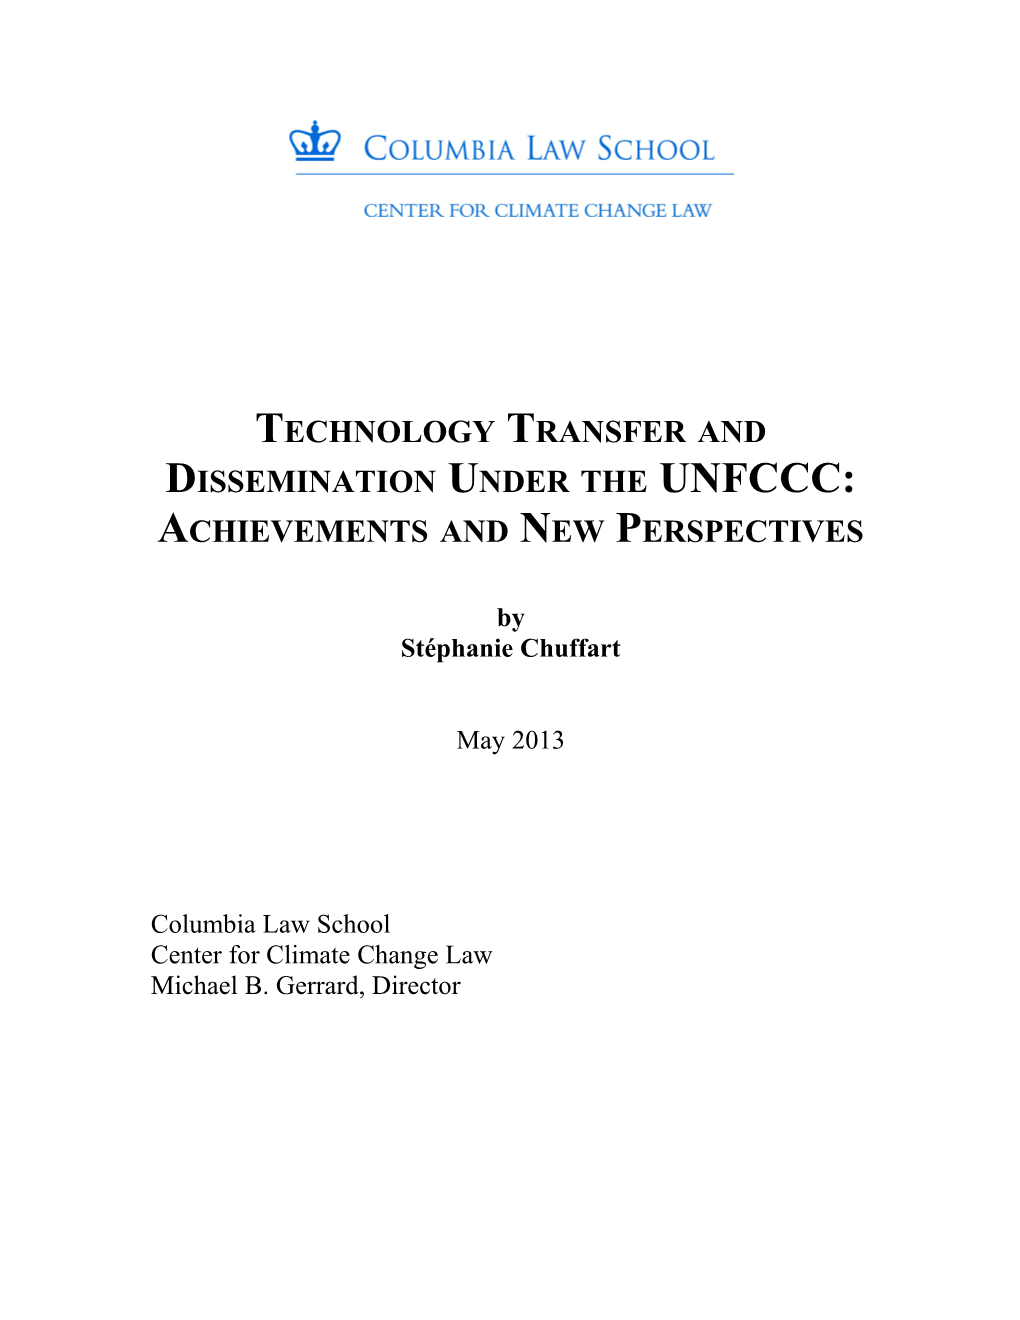 Technology Transfer and Dissemination Under the UNFCCC: Achievements and New Perspectives